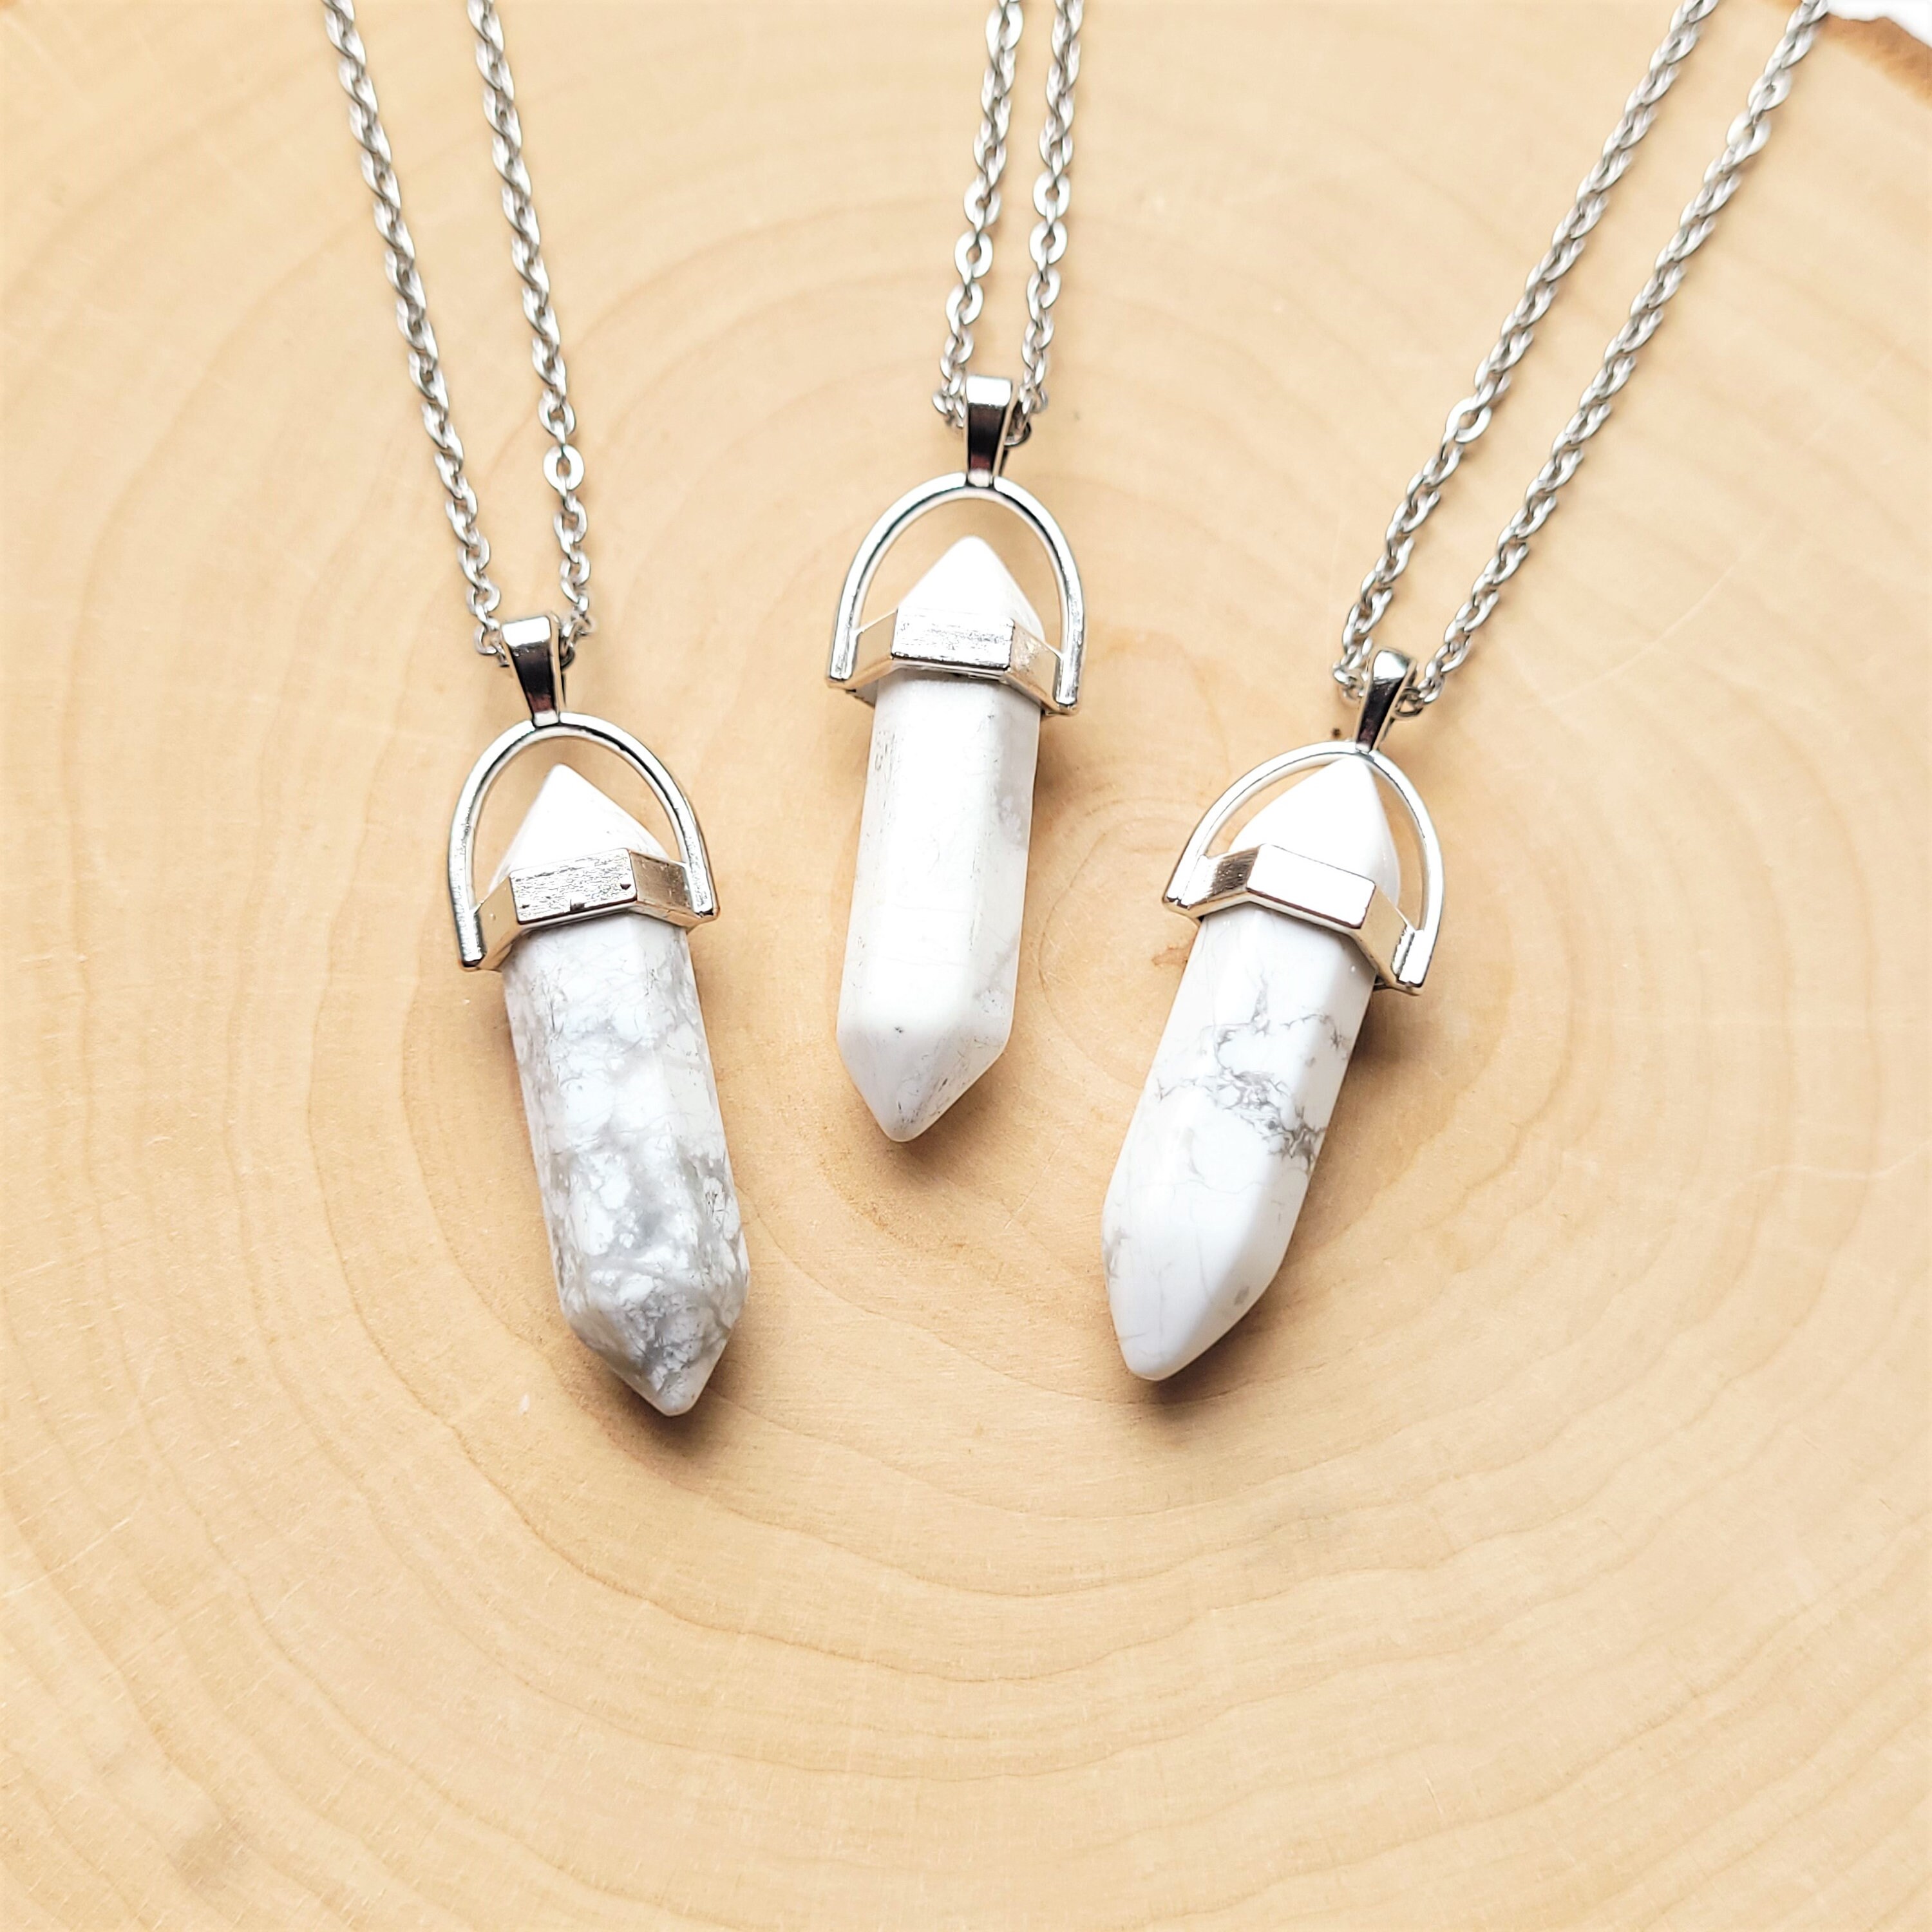 Howlite Necklace Howlite Crystal Necklace Long Necklace - Etsy